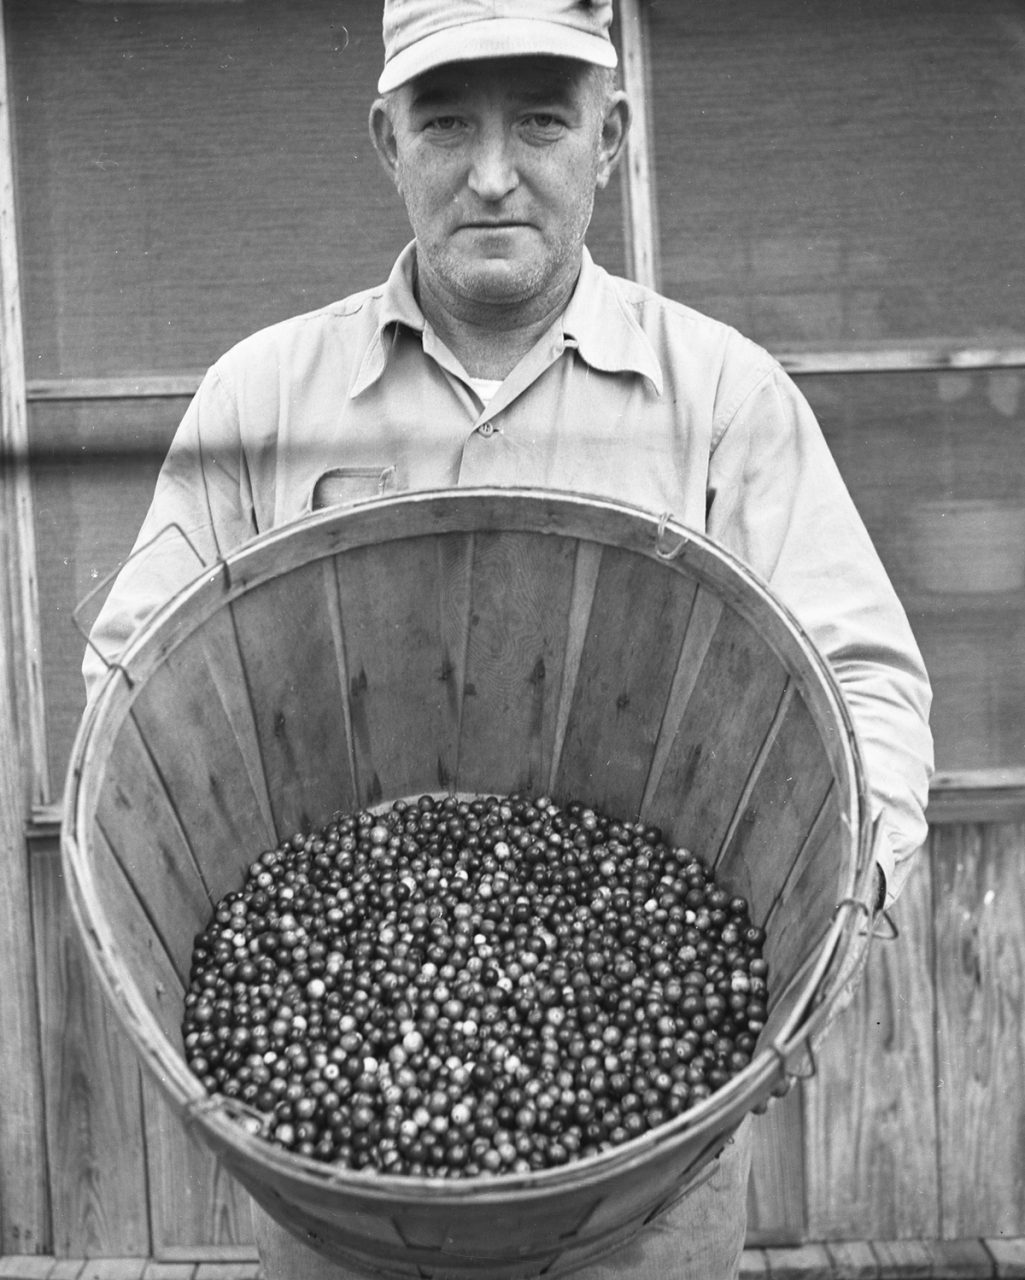 Tom Midgett holds a basket of cranberries harvested in Mann's Harbor during the 1952 season. Photo: Charles Brantley ‘Aycock’ Brown and courtesy of the Outer Banks History Center/North Carolina State Archives.